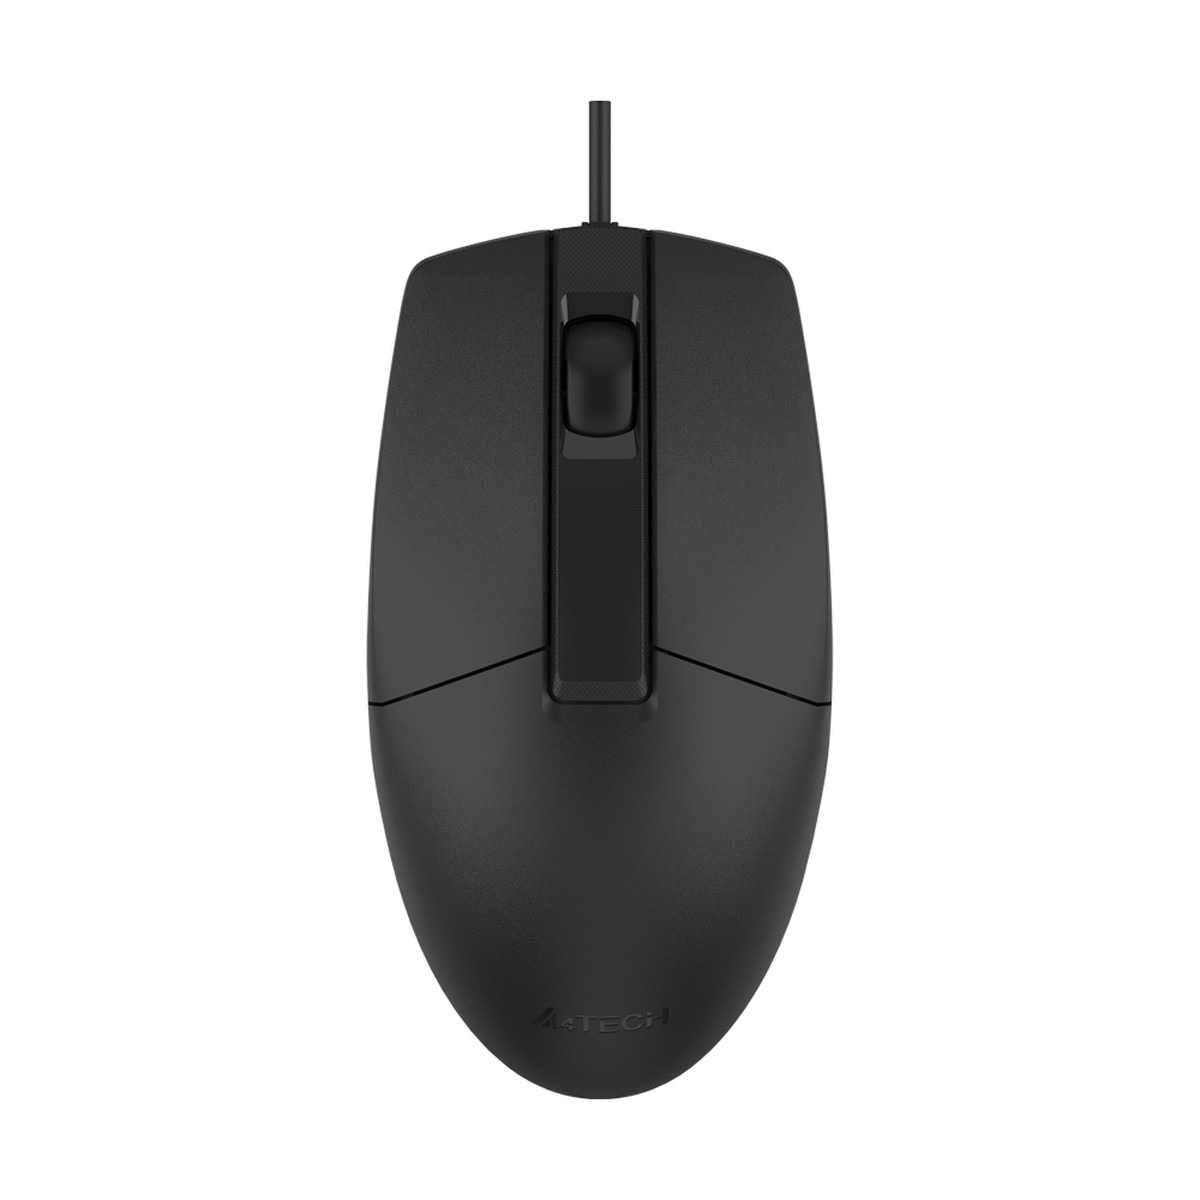 WIRED MOUSE A4TECH OP-330 SILENT CLICK 1200DPI USB ,Mouse